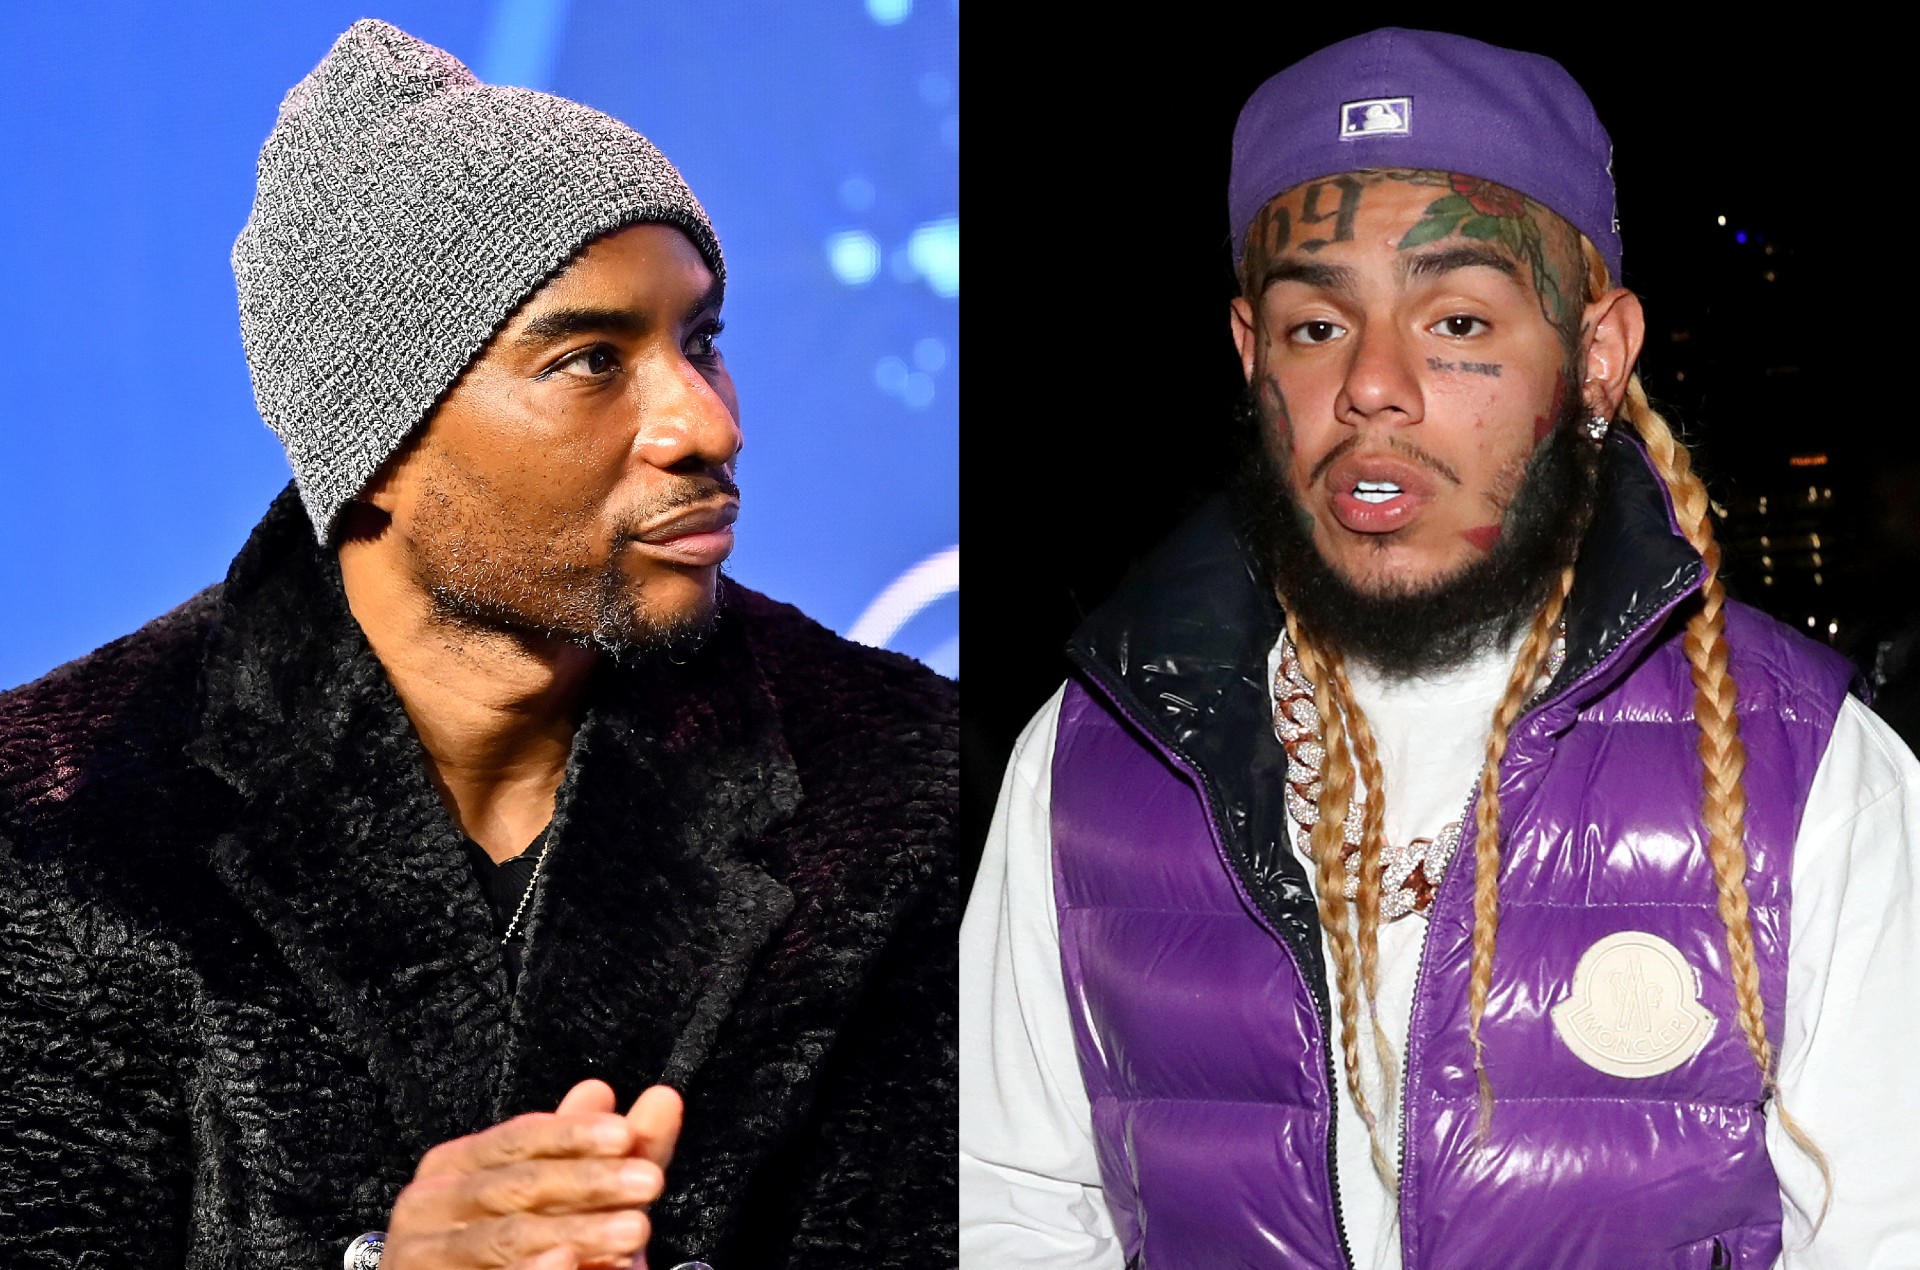 Charlamagne Tha God Says 6ix9ine Attack Was Only “A Matter Of Time”